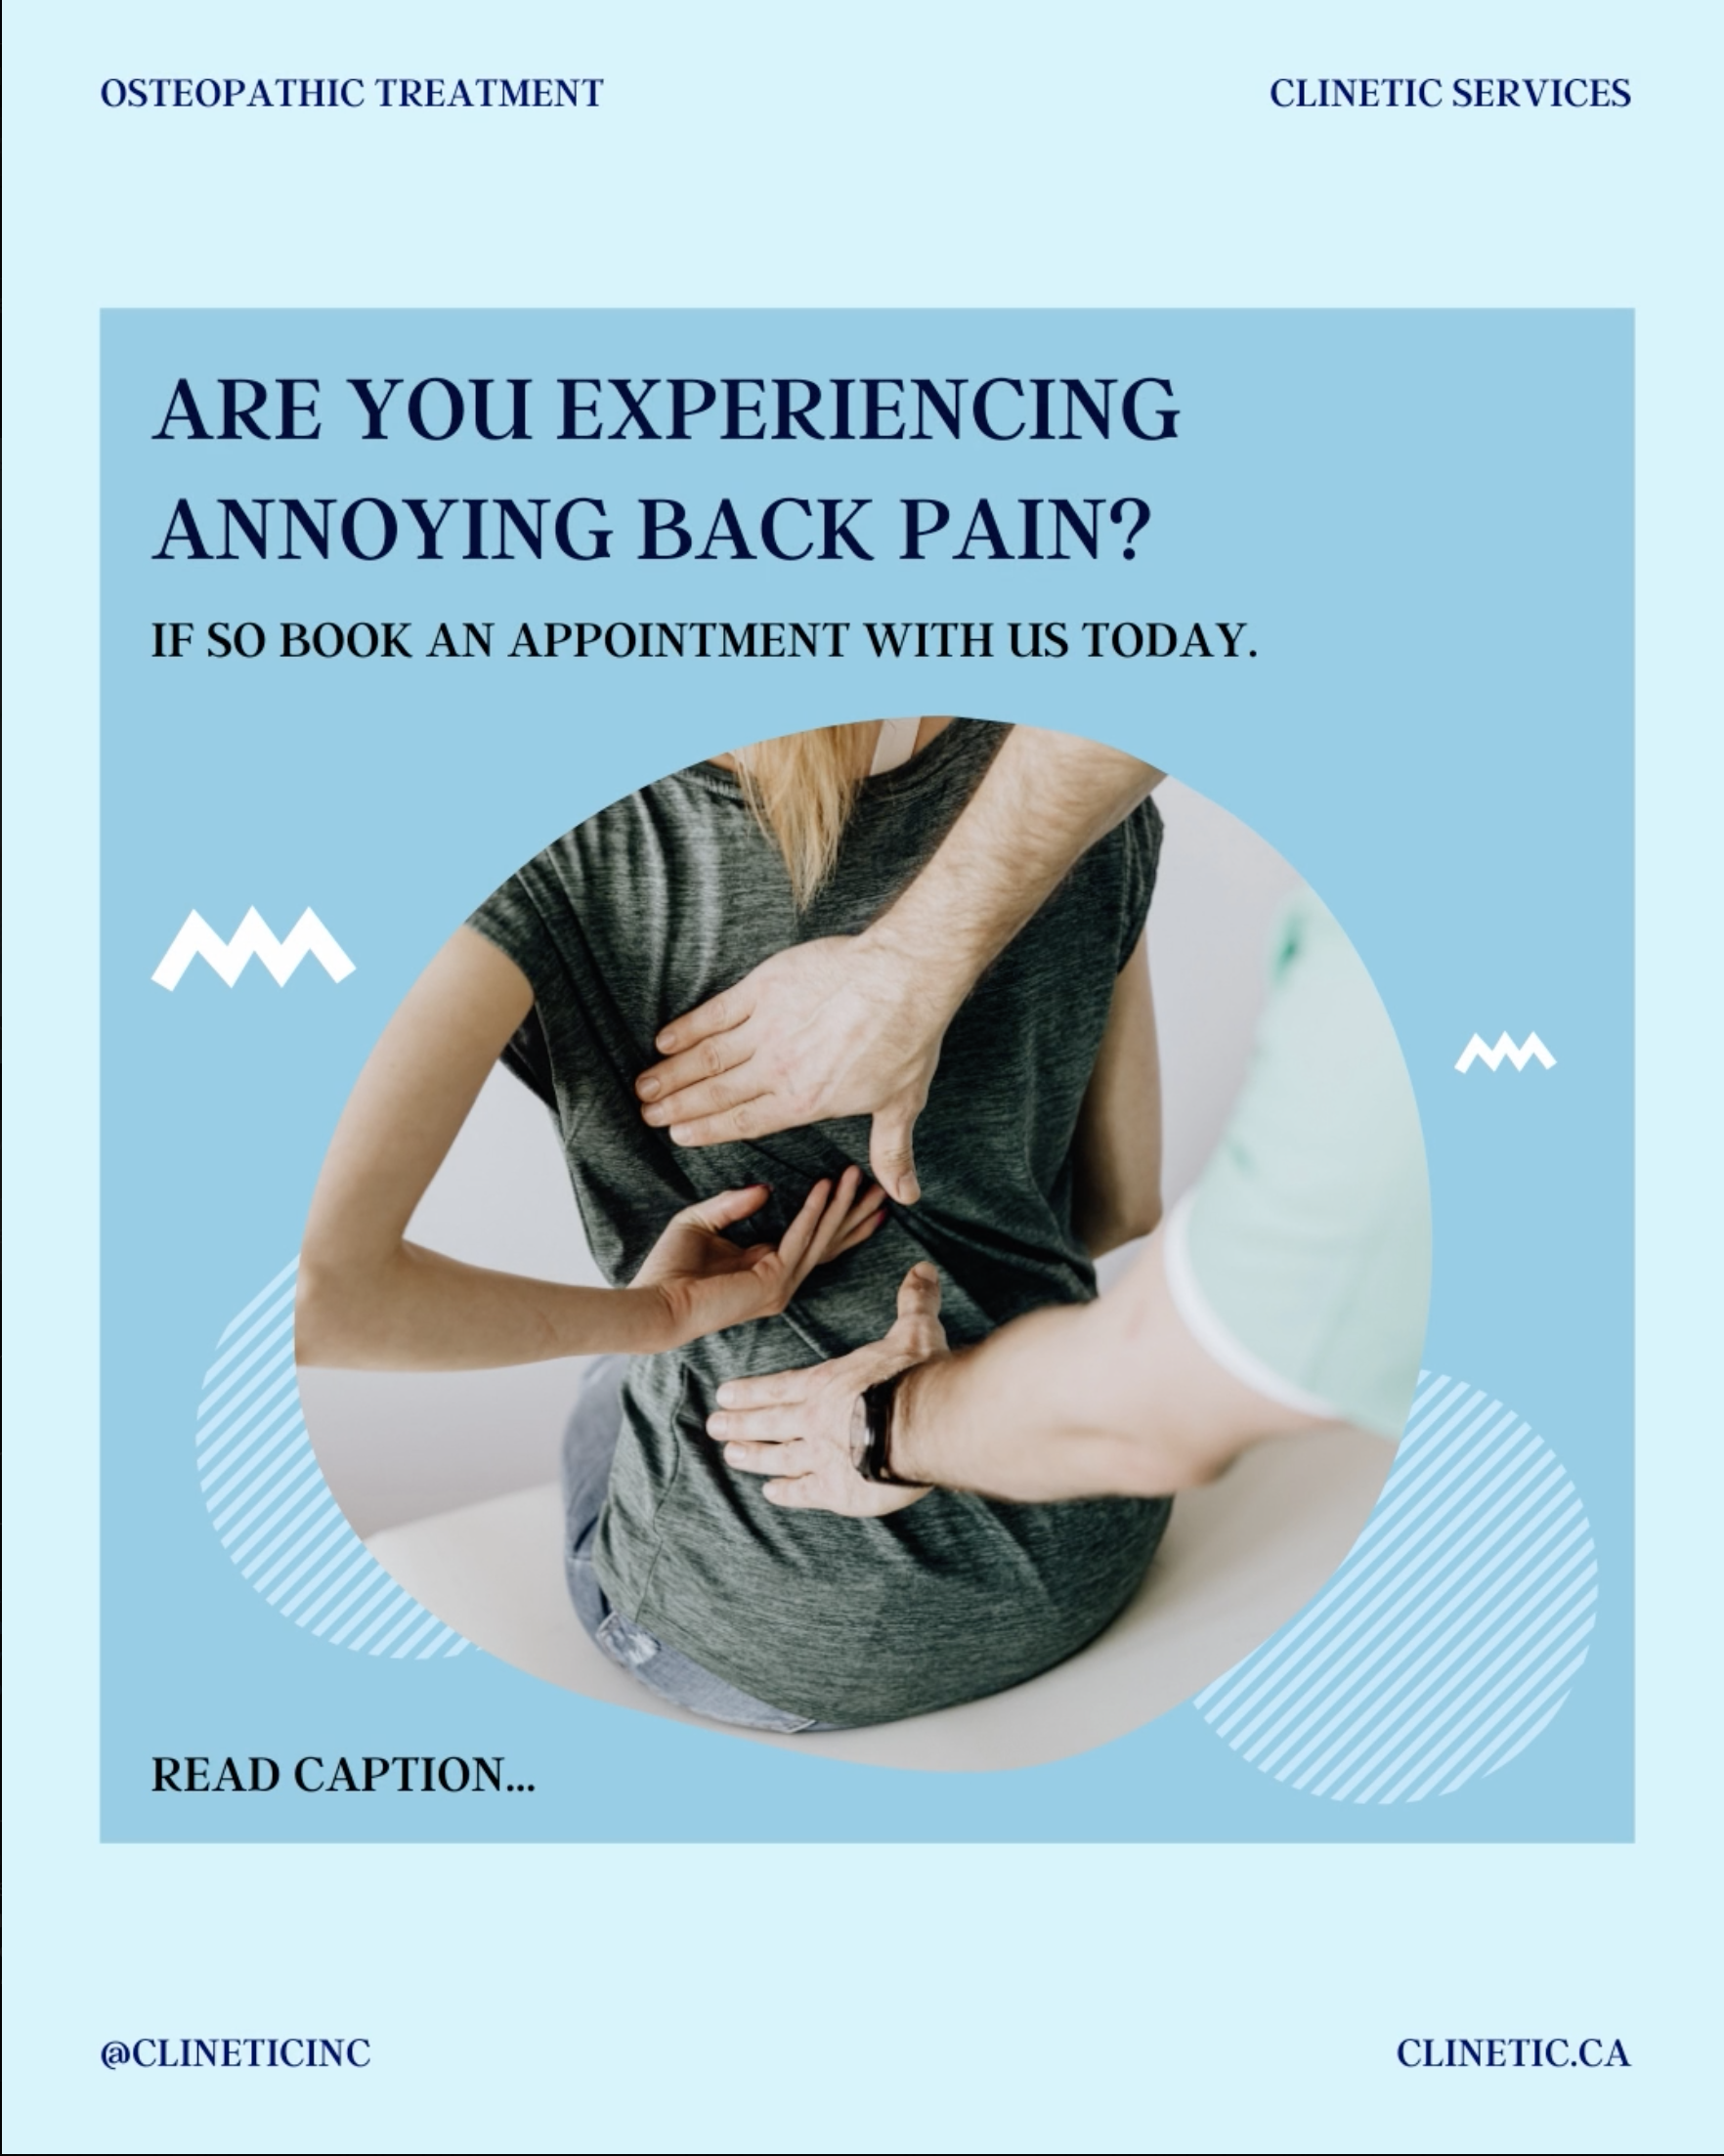 Are you experiencing annoying back pain?